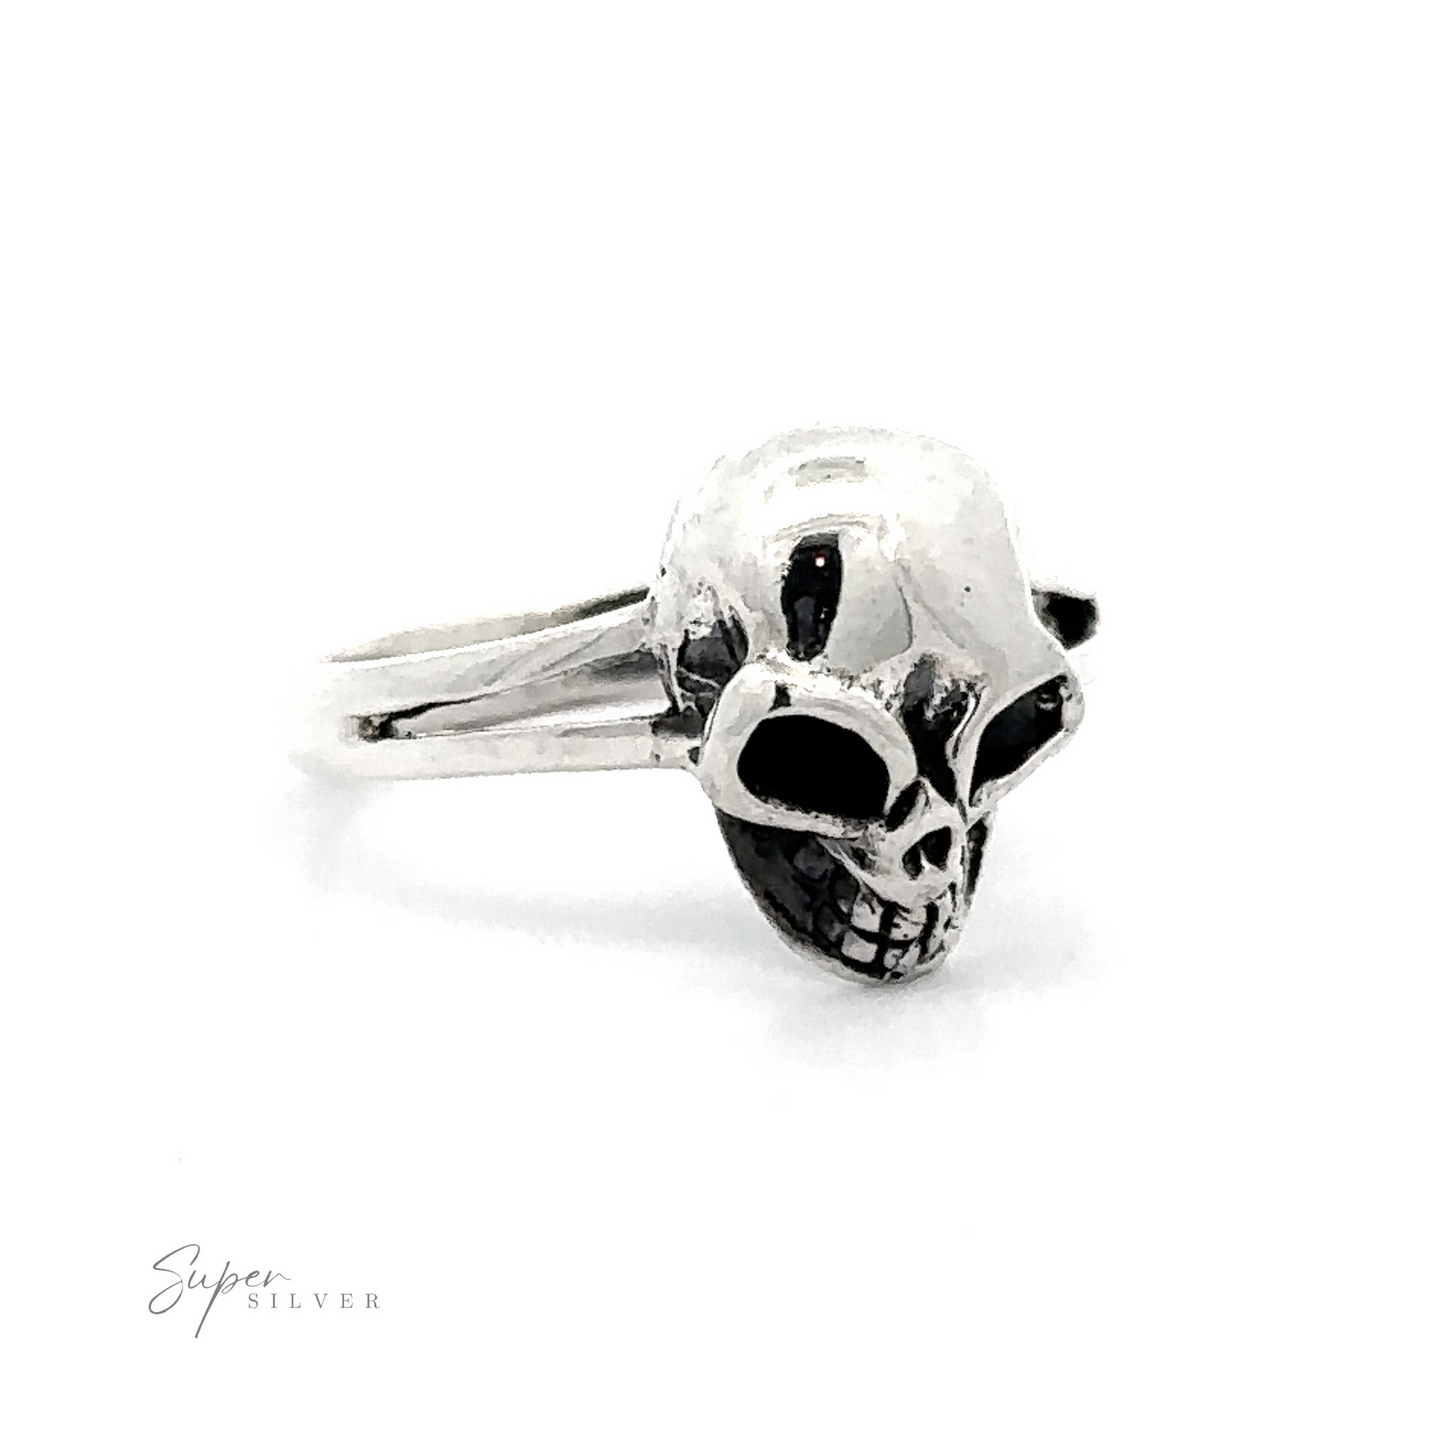 Silver Skull Ring shaped like a bird skull on a white background.